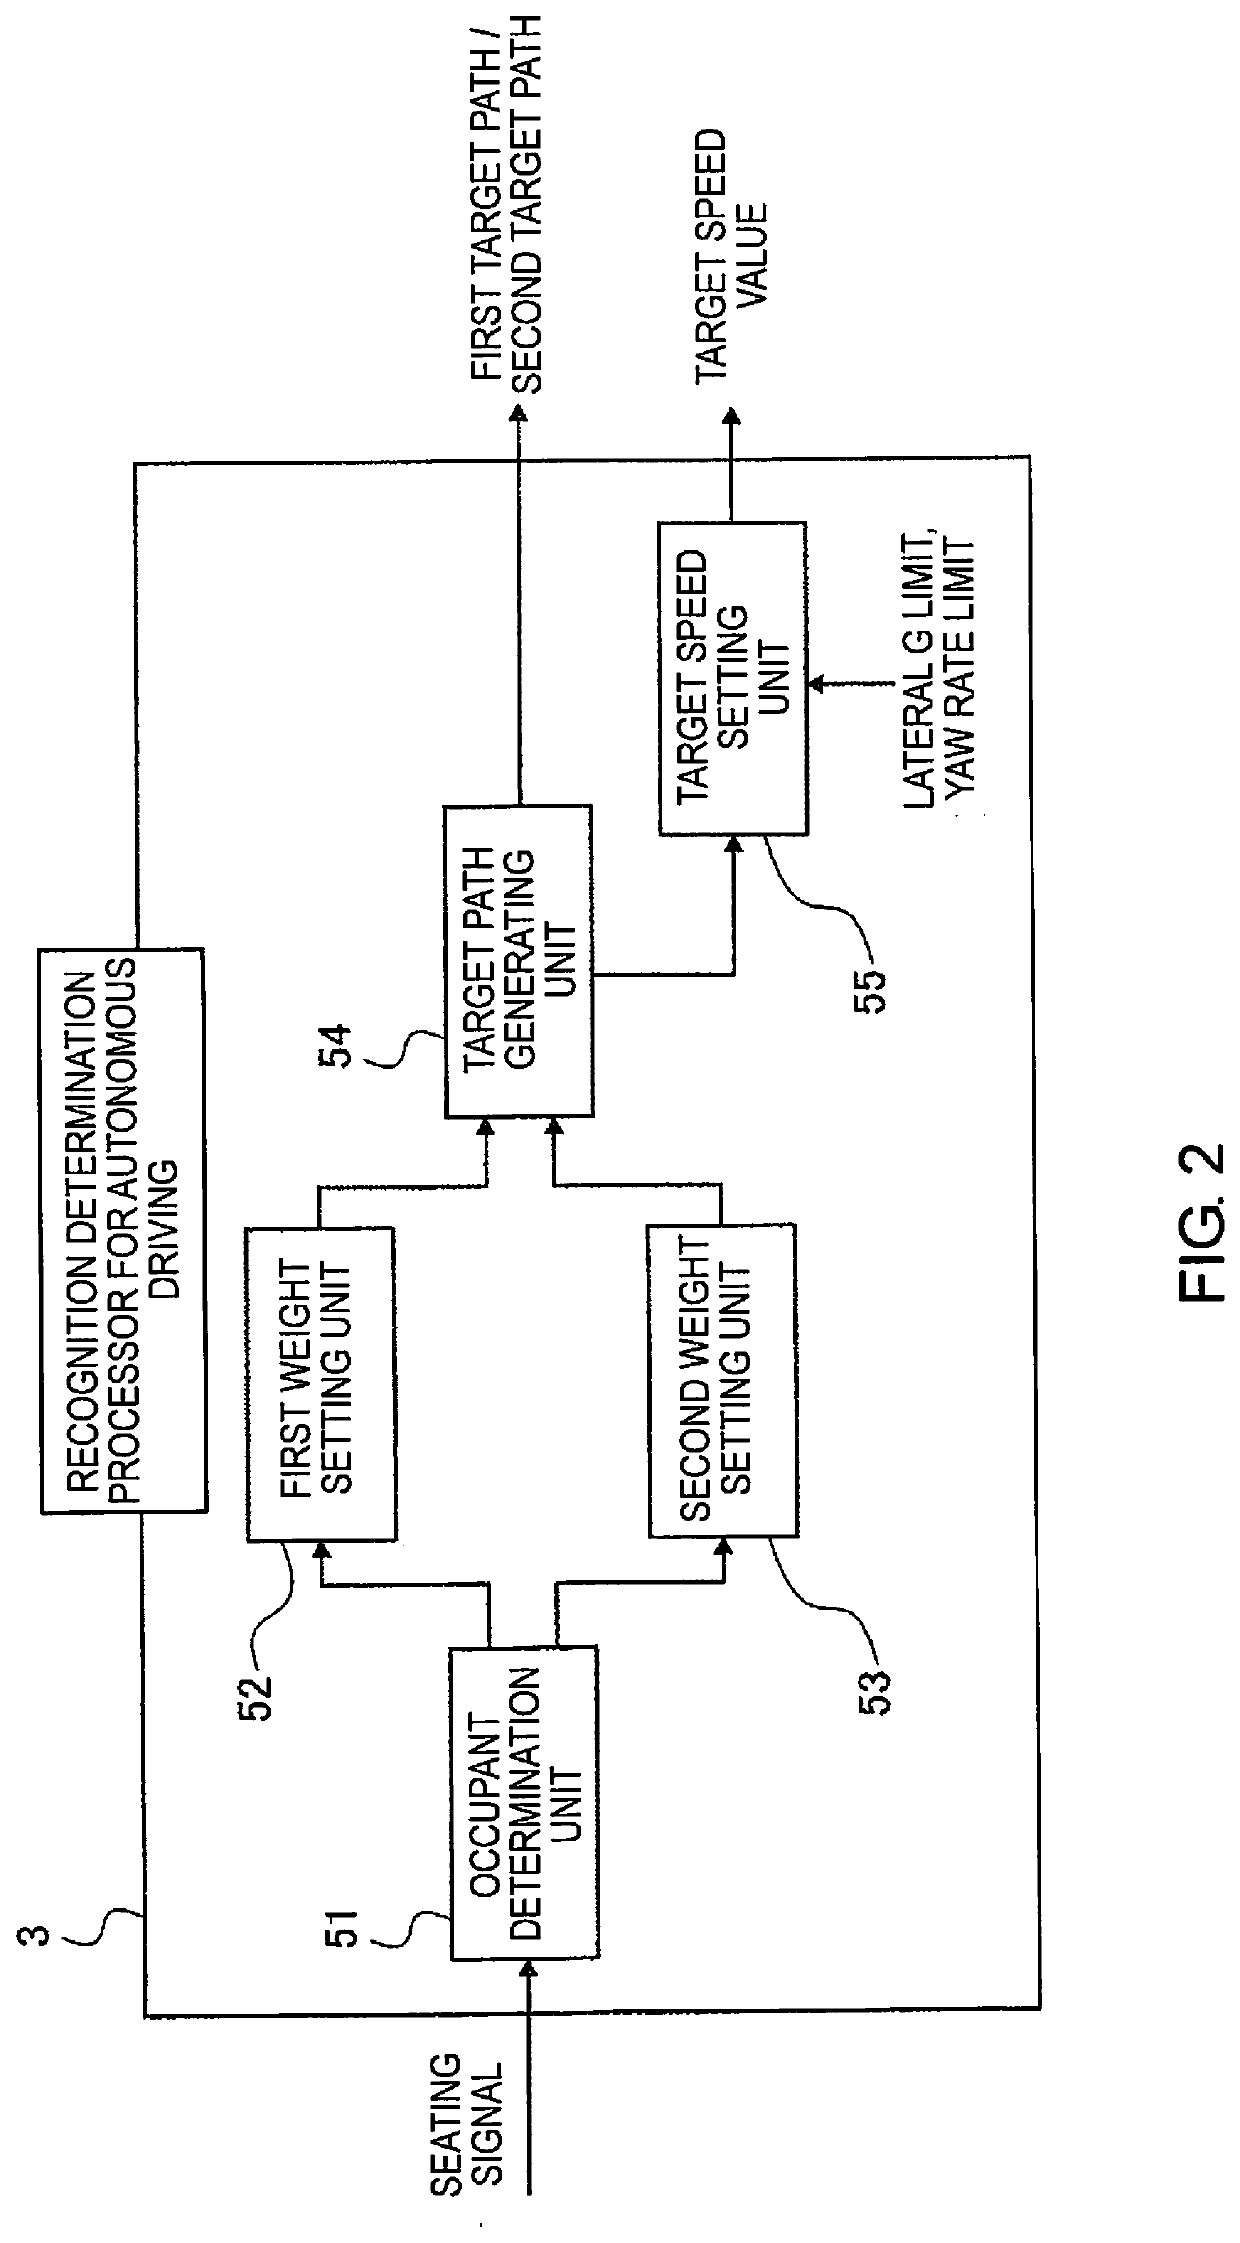 Method and device for generating target path for autonomous vehicle